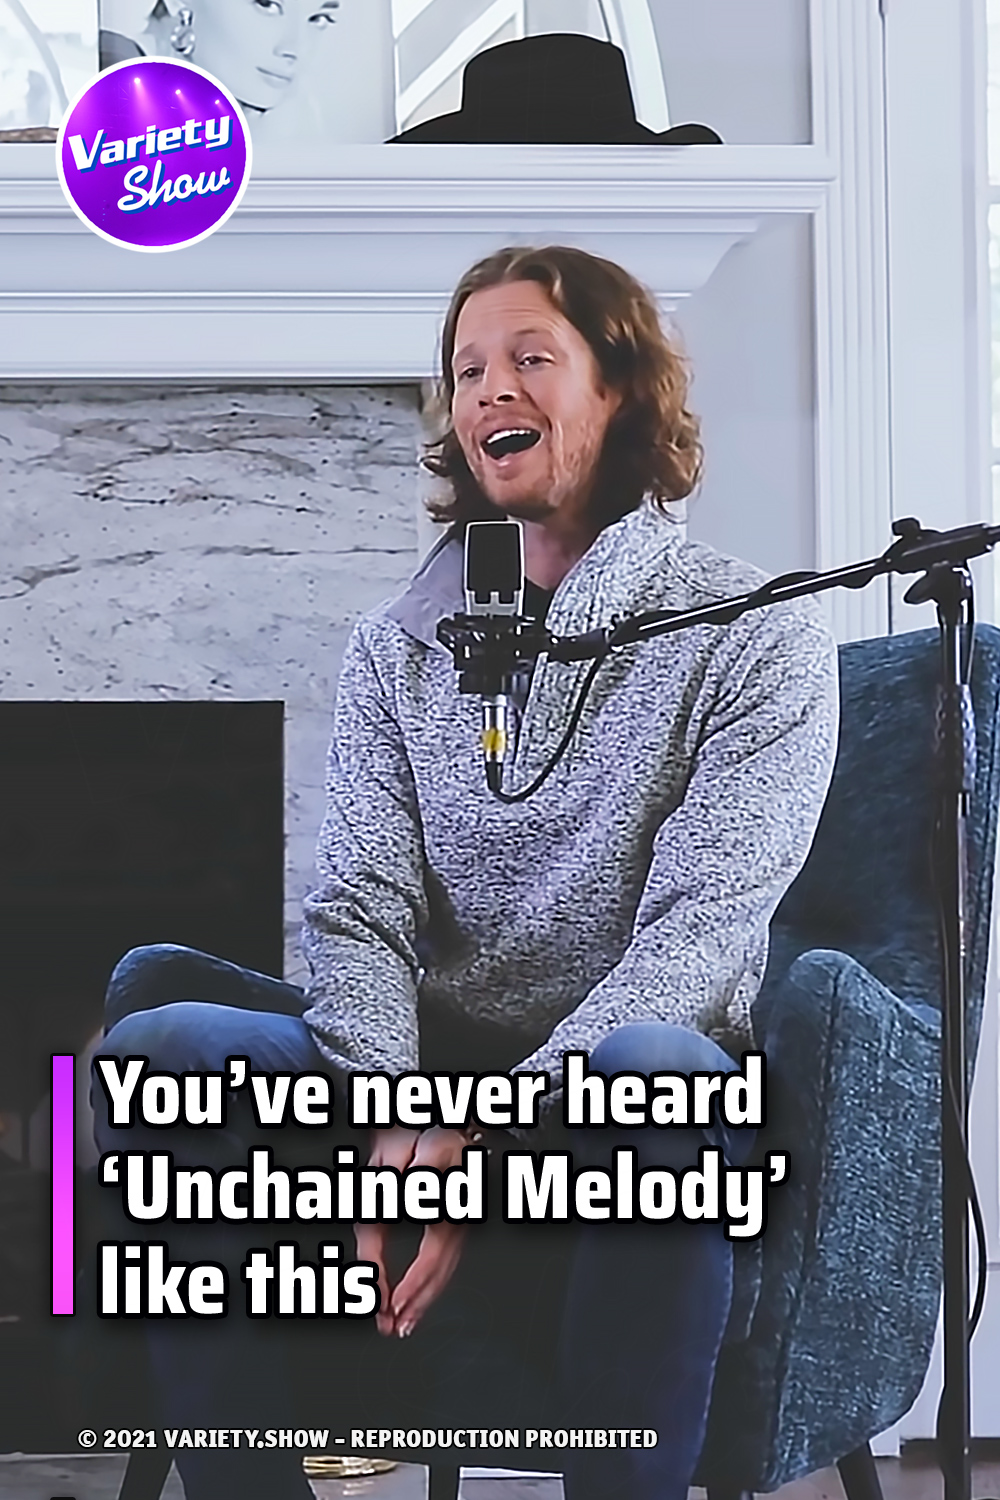 You’ve never heard ‘Unchained Melody’ like this